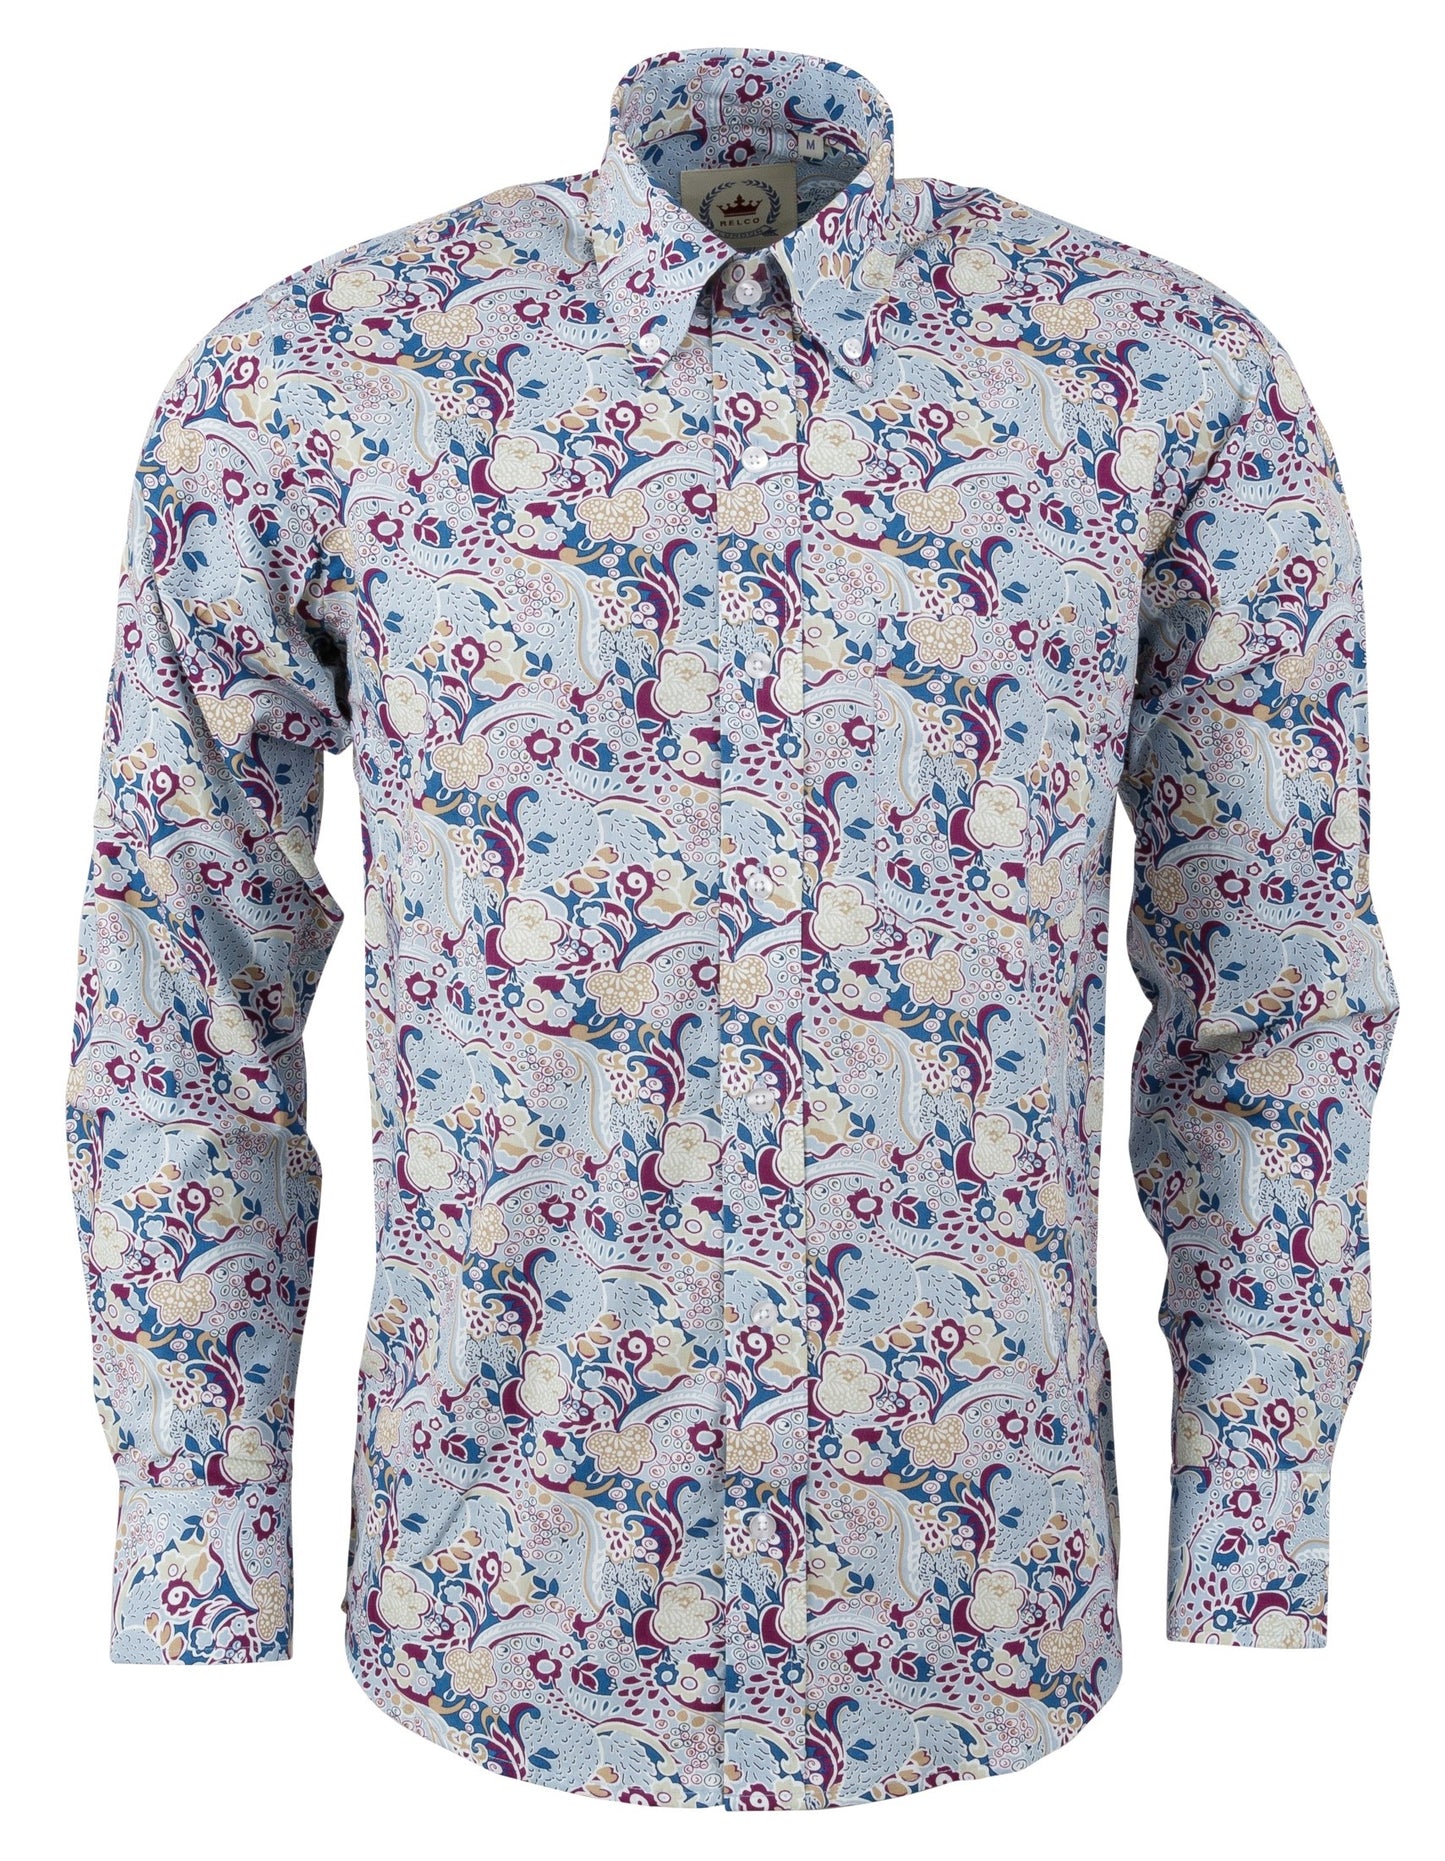 Relco Blue Multi Paisley Long Sleeved Retro Mod Button Down Shirt